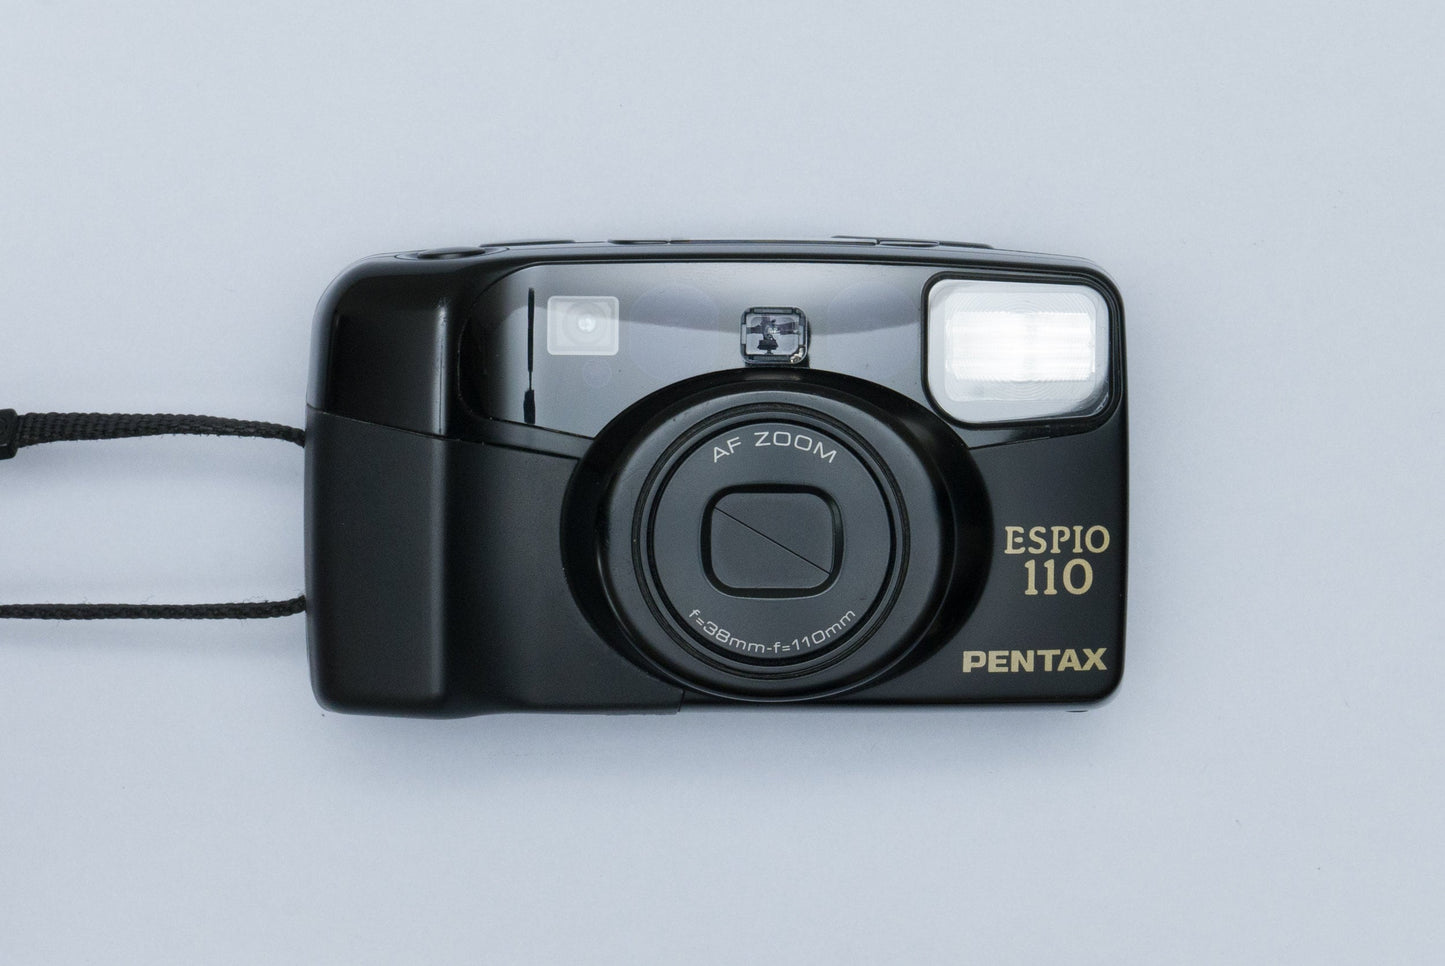 Pentax Espio 110 Point and Shoot 35mm Compact Film Camera